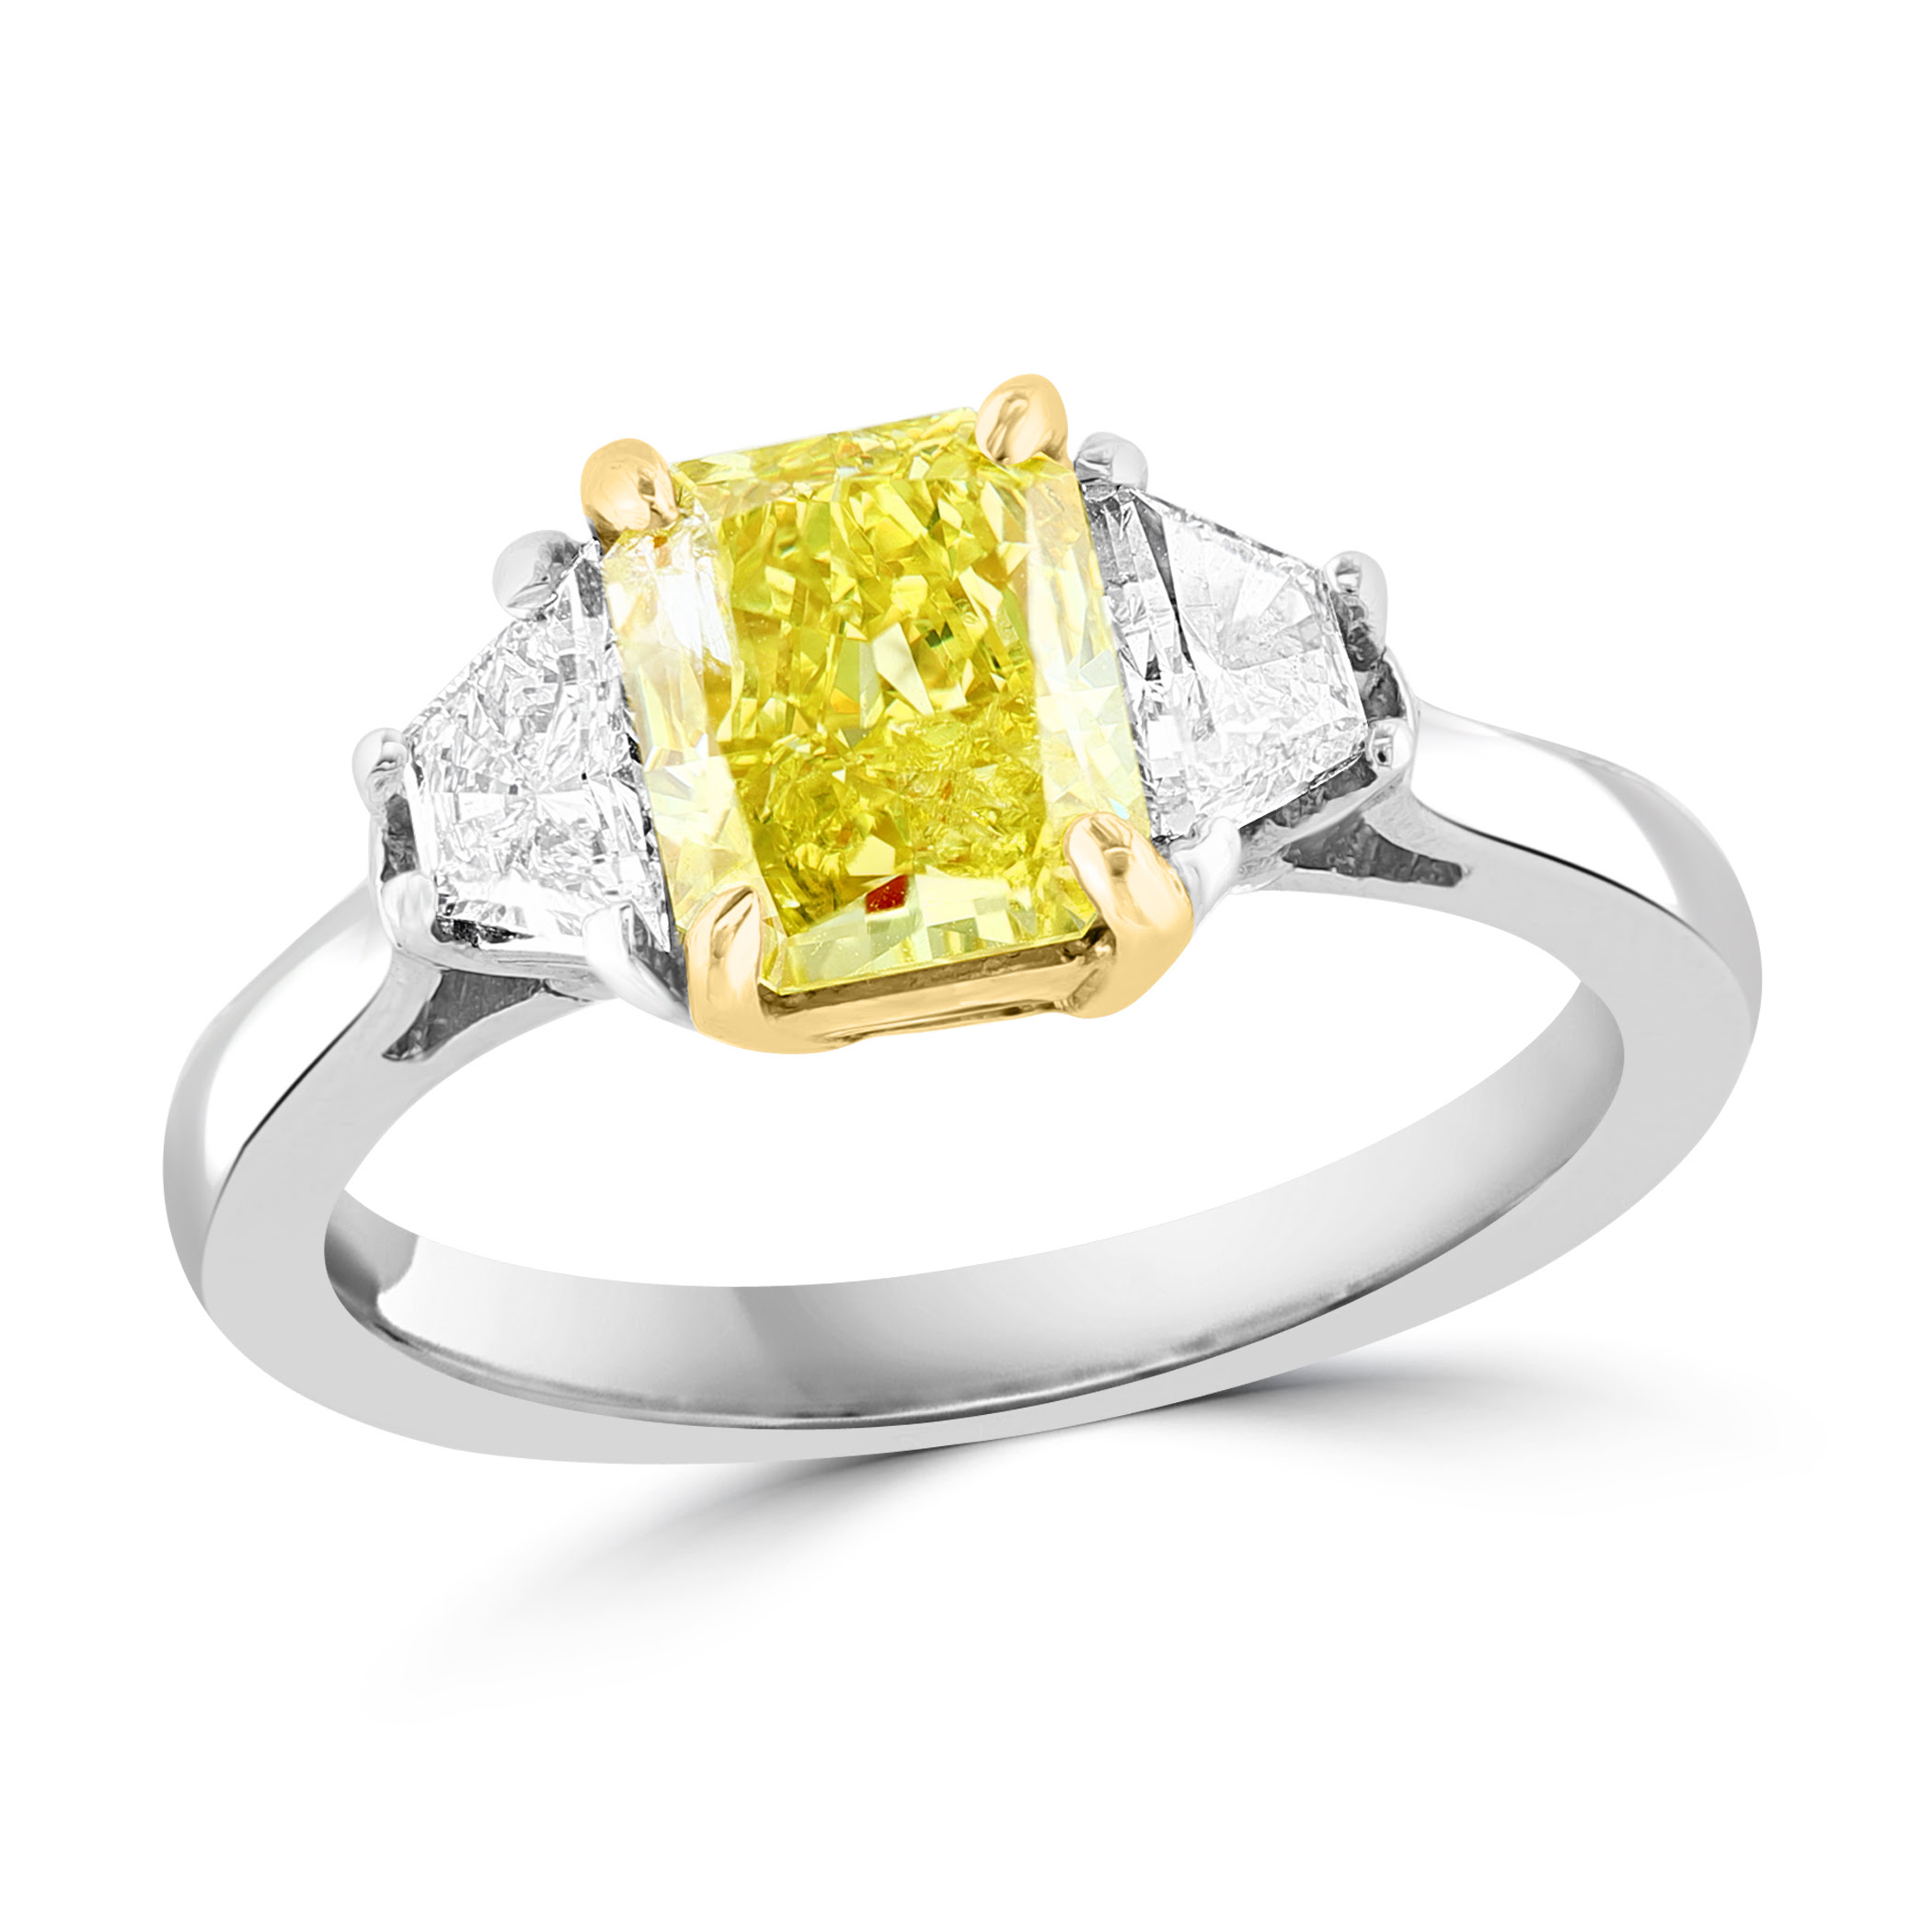 NYC Wholesale Diamonds Blog - #1 rated Engagement Ring Company on Yelp ...